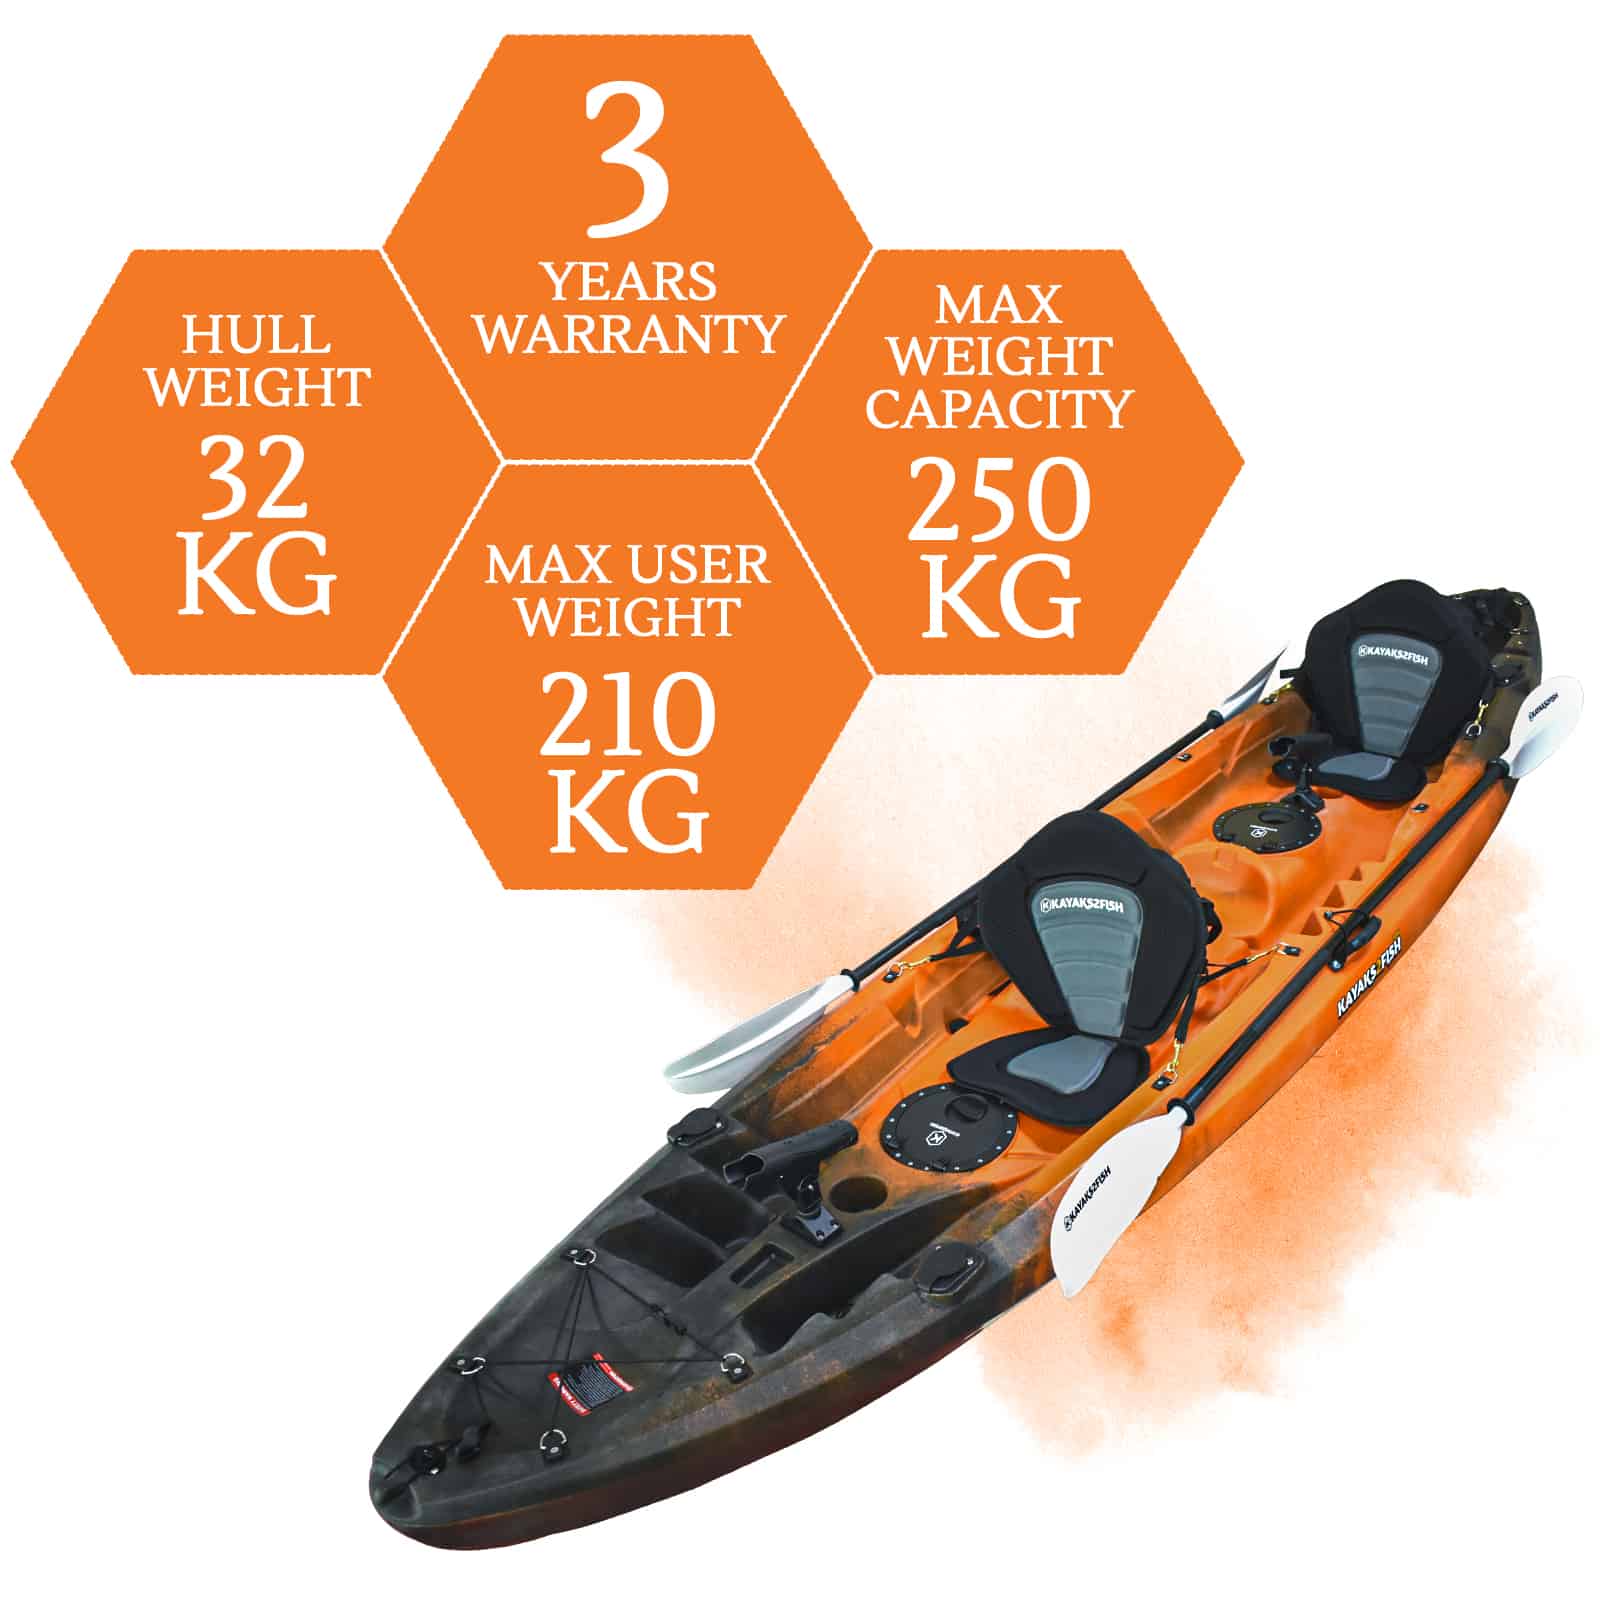 K2FA-EAGLE-SUNSET specifications